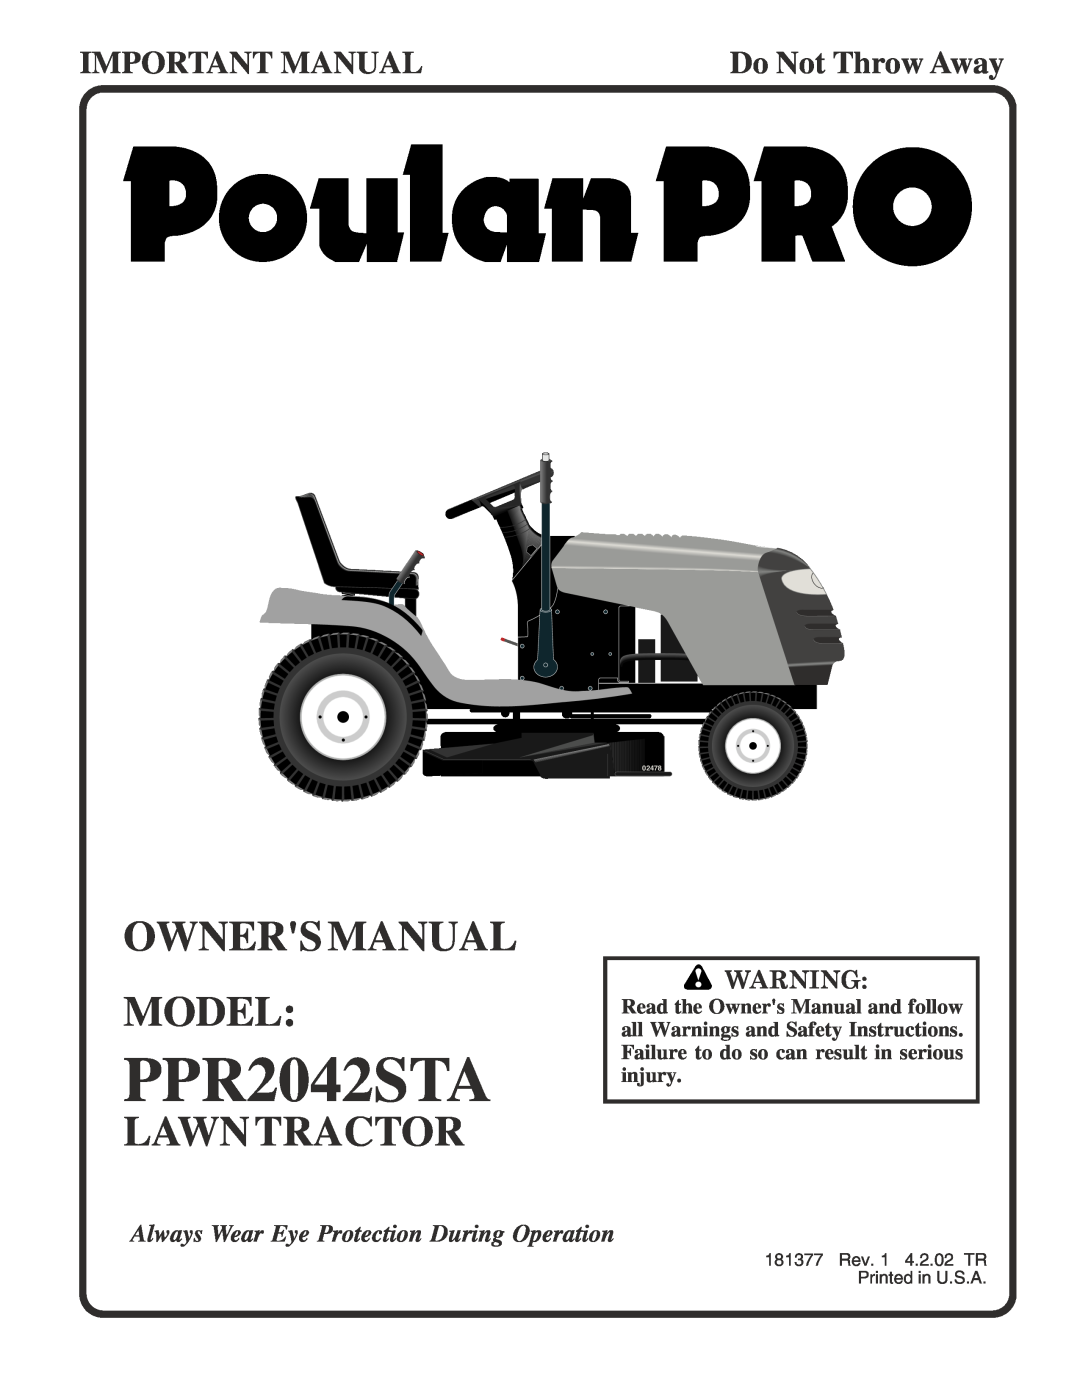 Poulan 181377 owner manual PPR2042STA, Lawntractor, Important Manual, Do Not Throw Away, 02478 